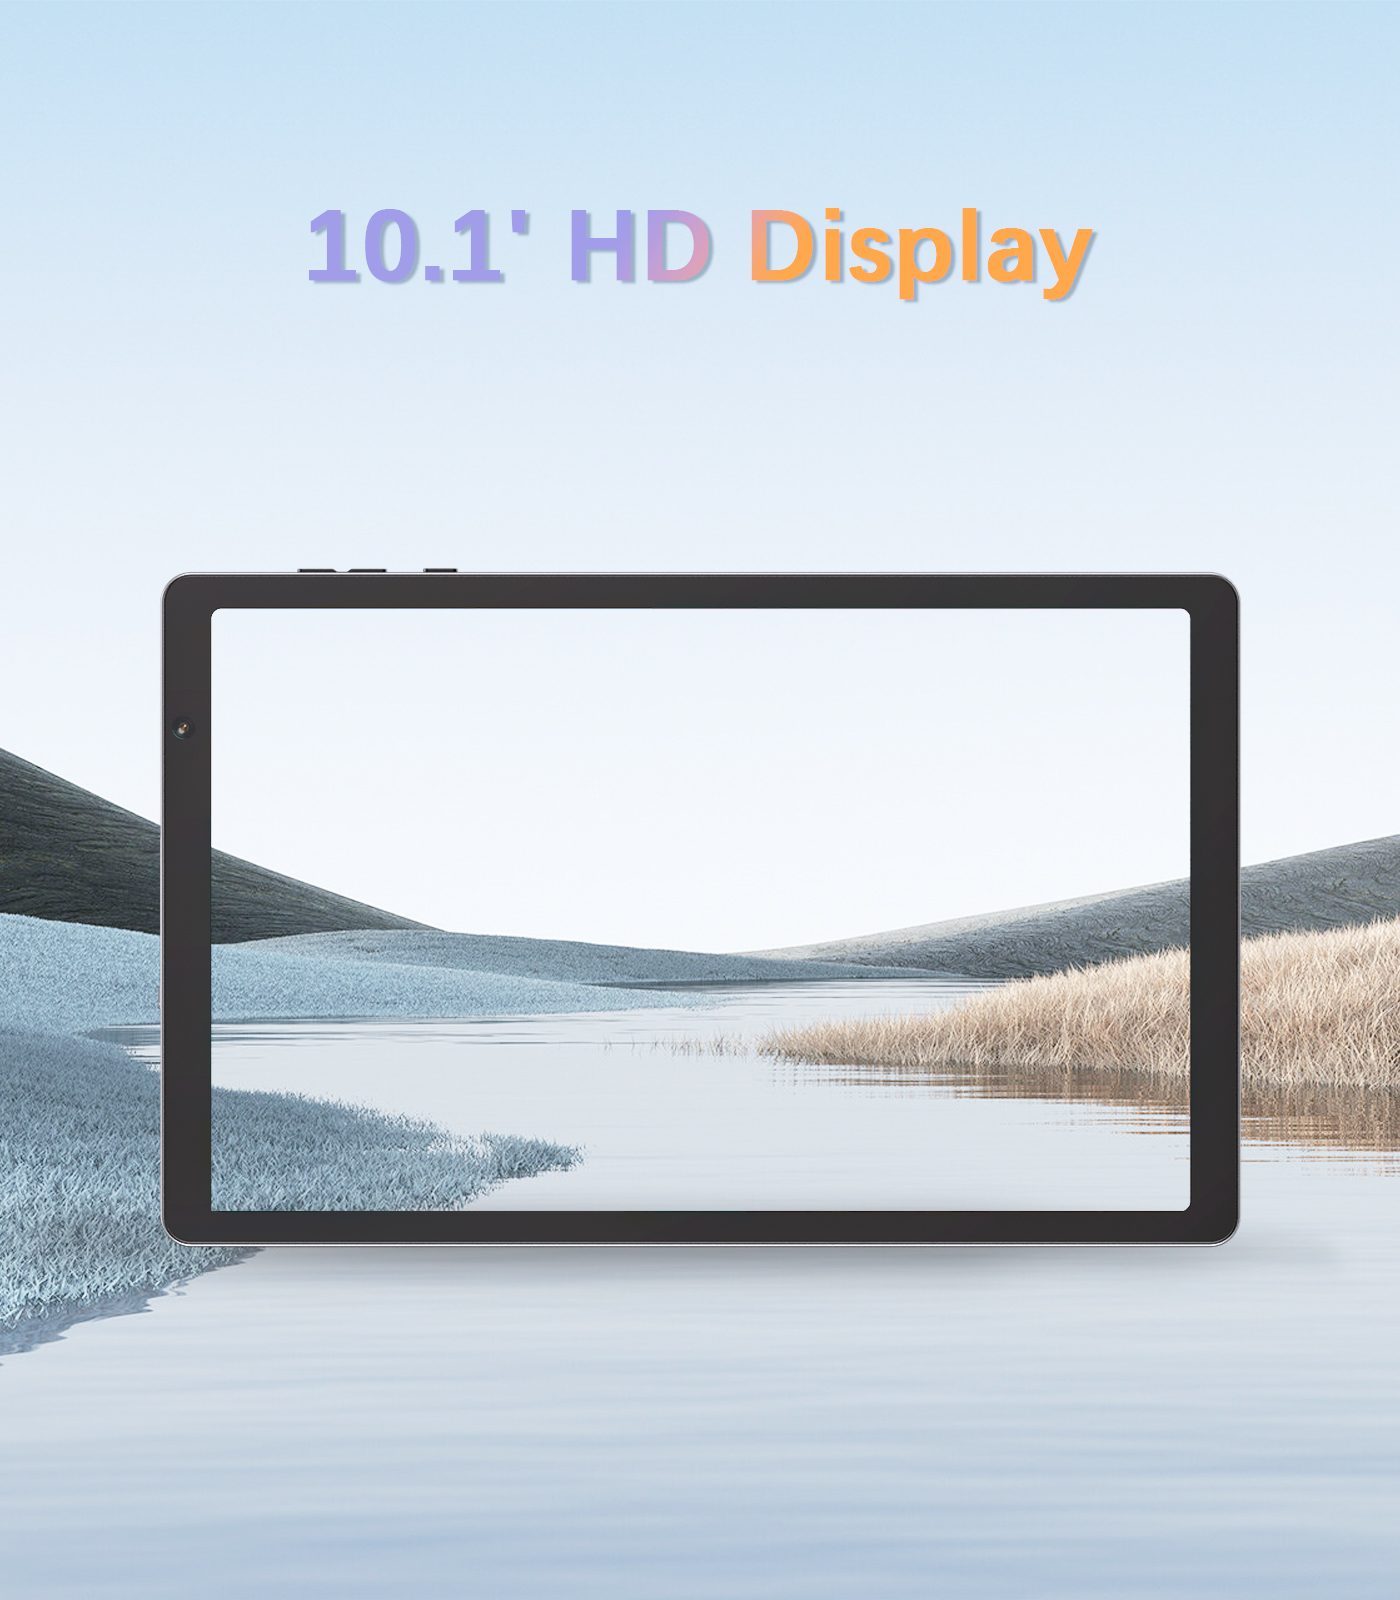 10.1 inch Tablet, Android 11.0, 3GB RAM, 32GB ROM, MAGCH Android Tablet with Quad-Core Processor, Up to 1.8Ghz, 8MP Rear Camera, HD IPS Display, 5000mAh Battery, Wi-Fi, Bluetooth 4.2, Metal Body, Grey